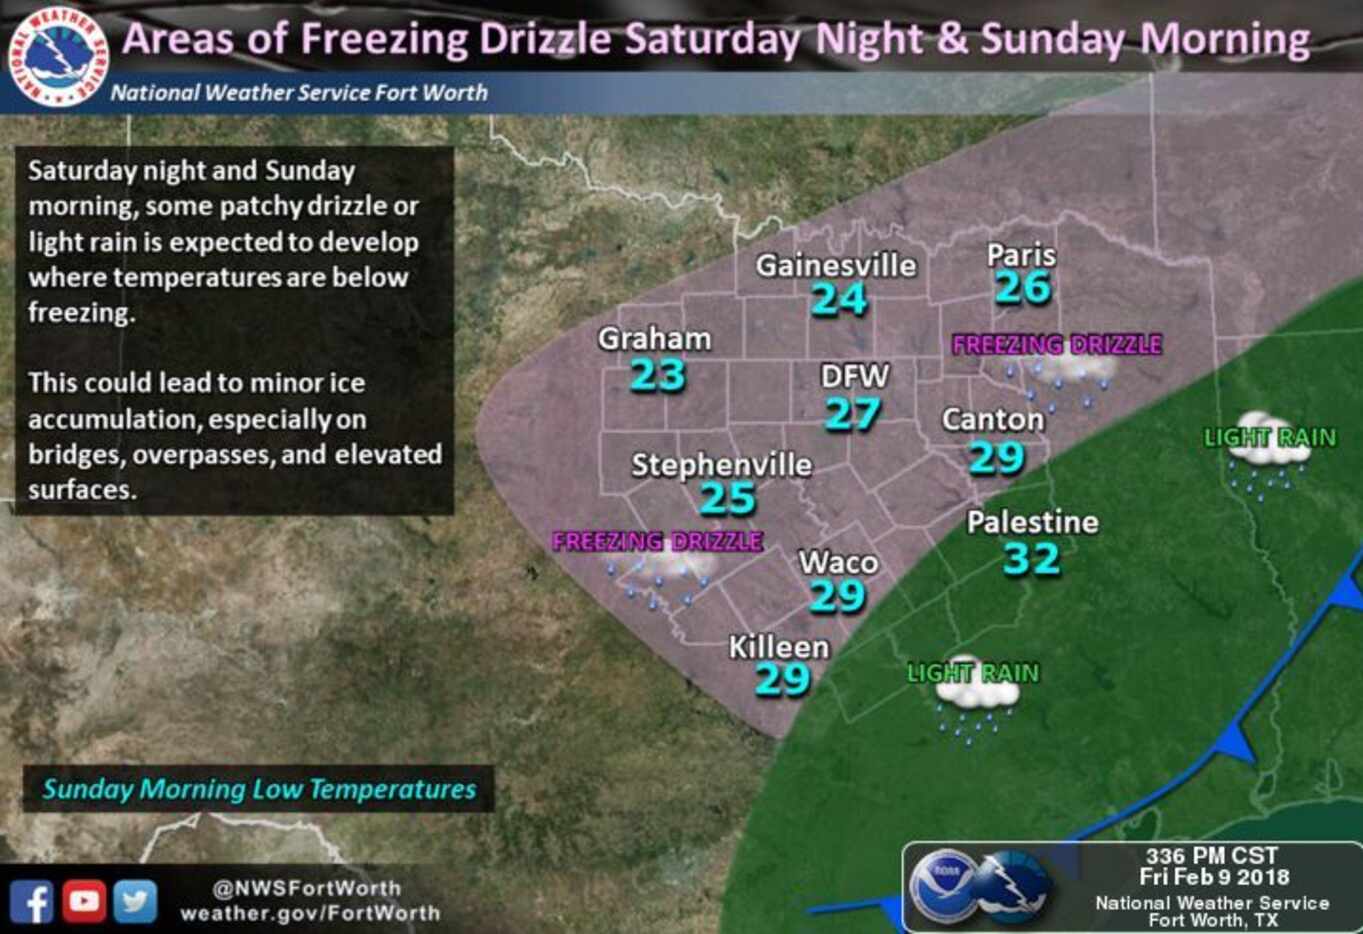 Old Man Winter is back to embrace all of North and Central Texas in his icy grip.